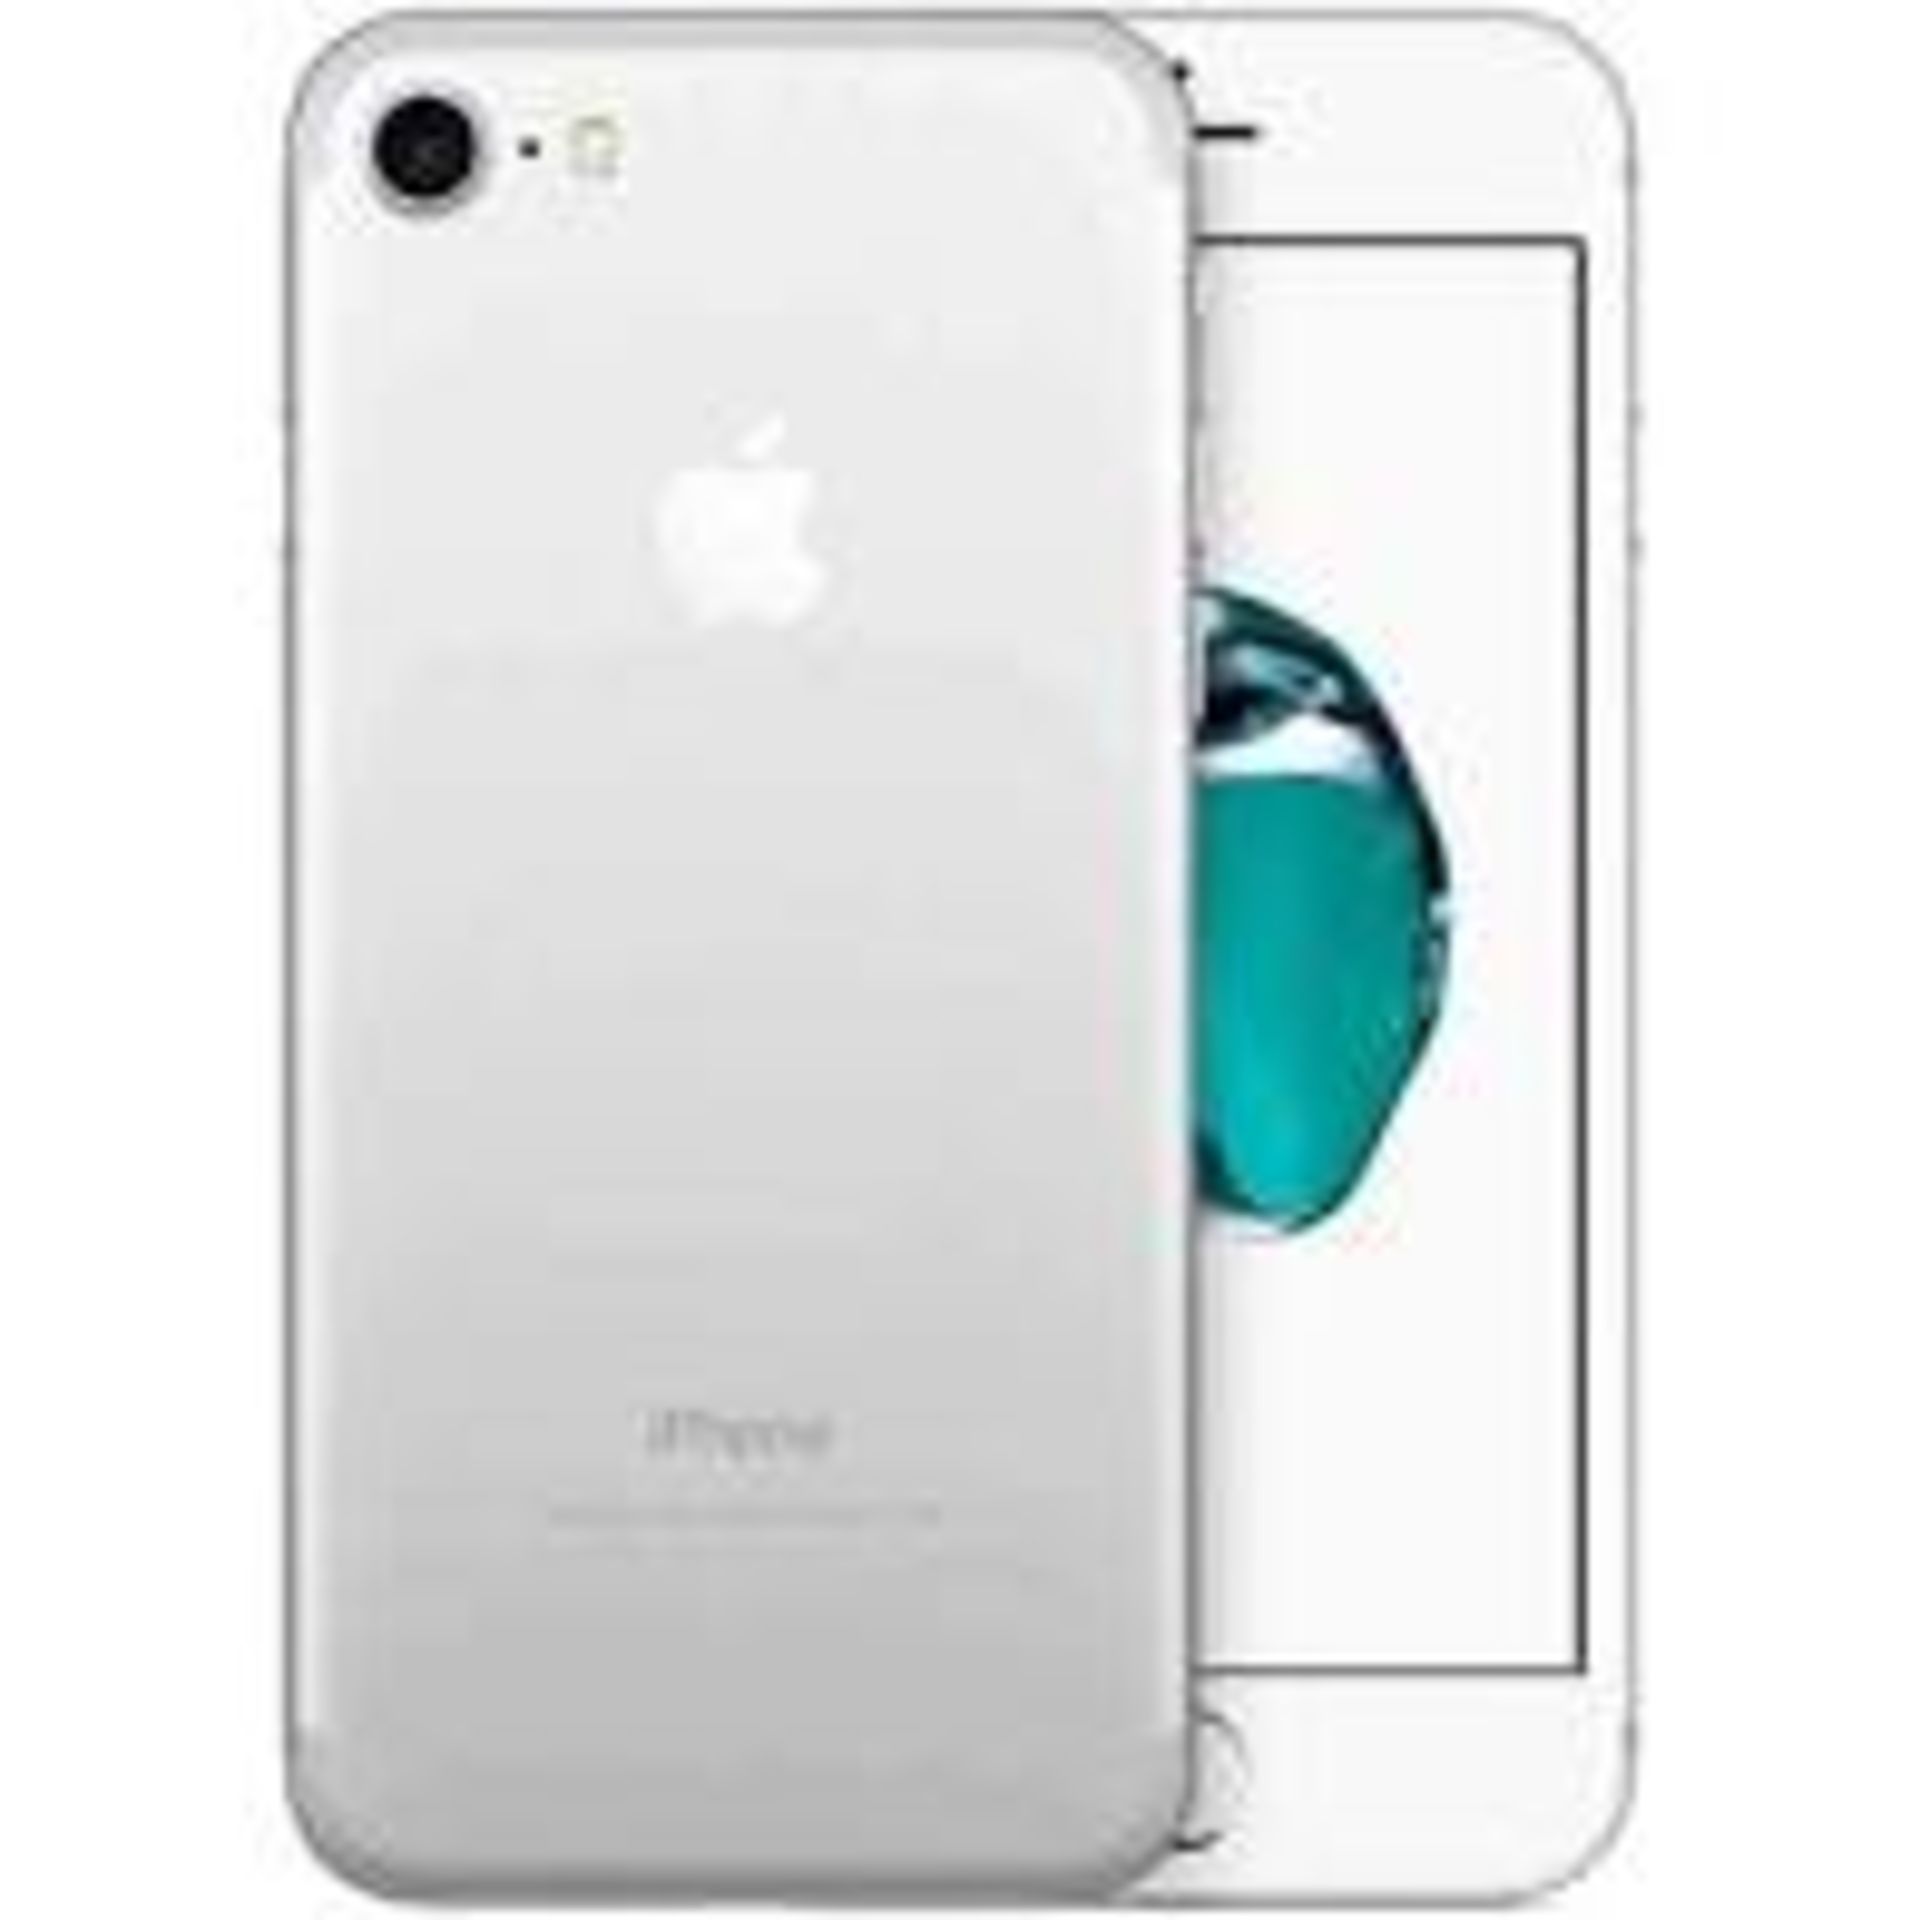 Apple iPhone 7 128GB Silver RRP £430 - Grade A - Perfect Working Condition - (Fully refurbished